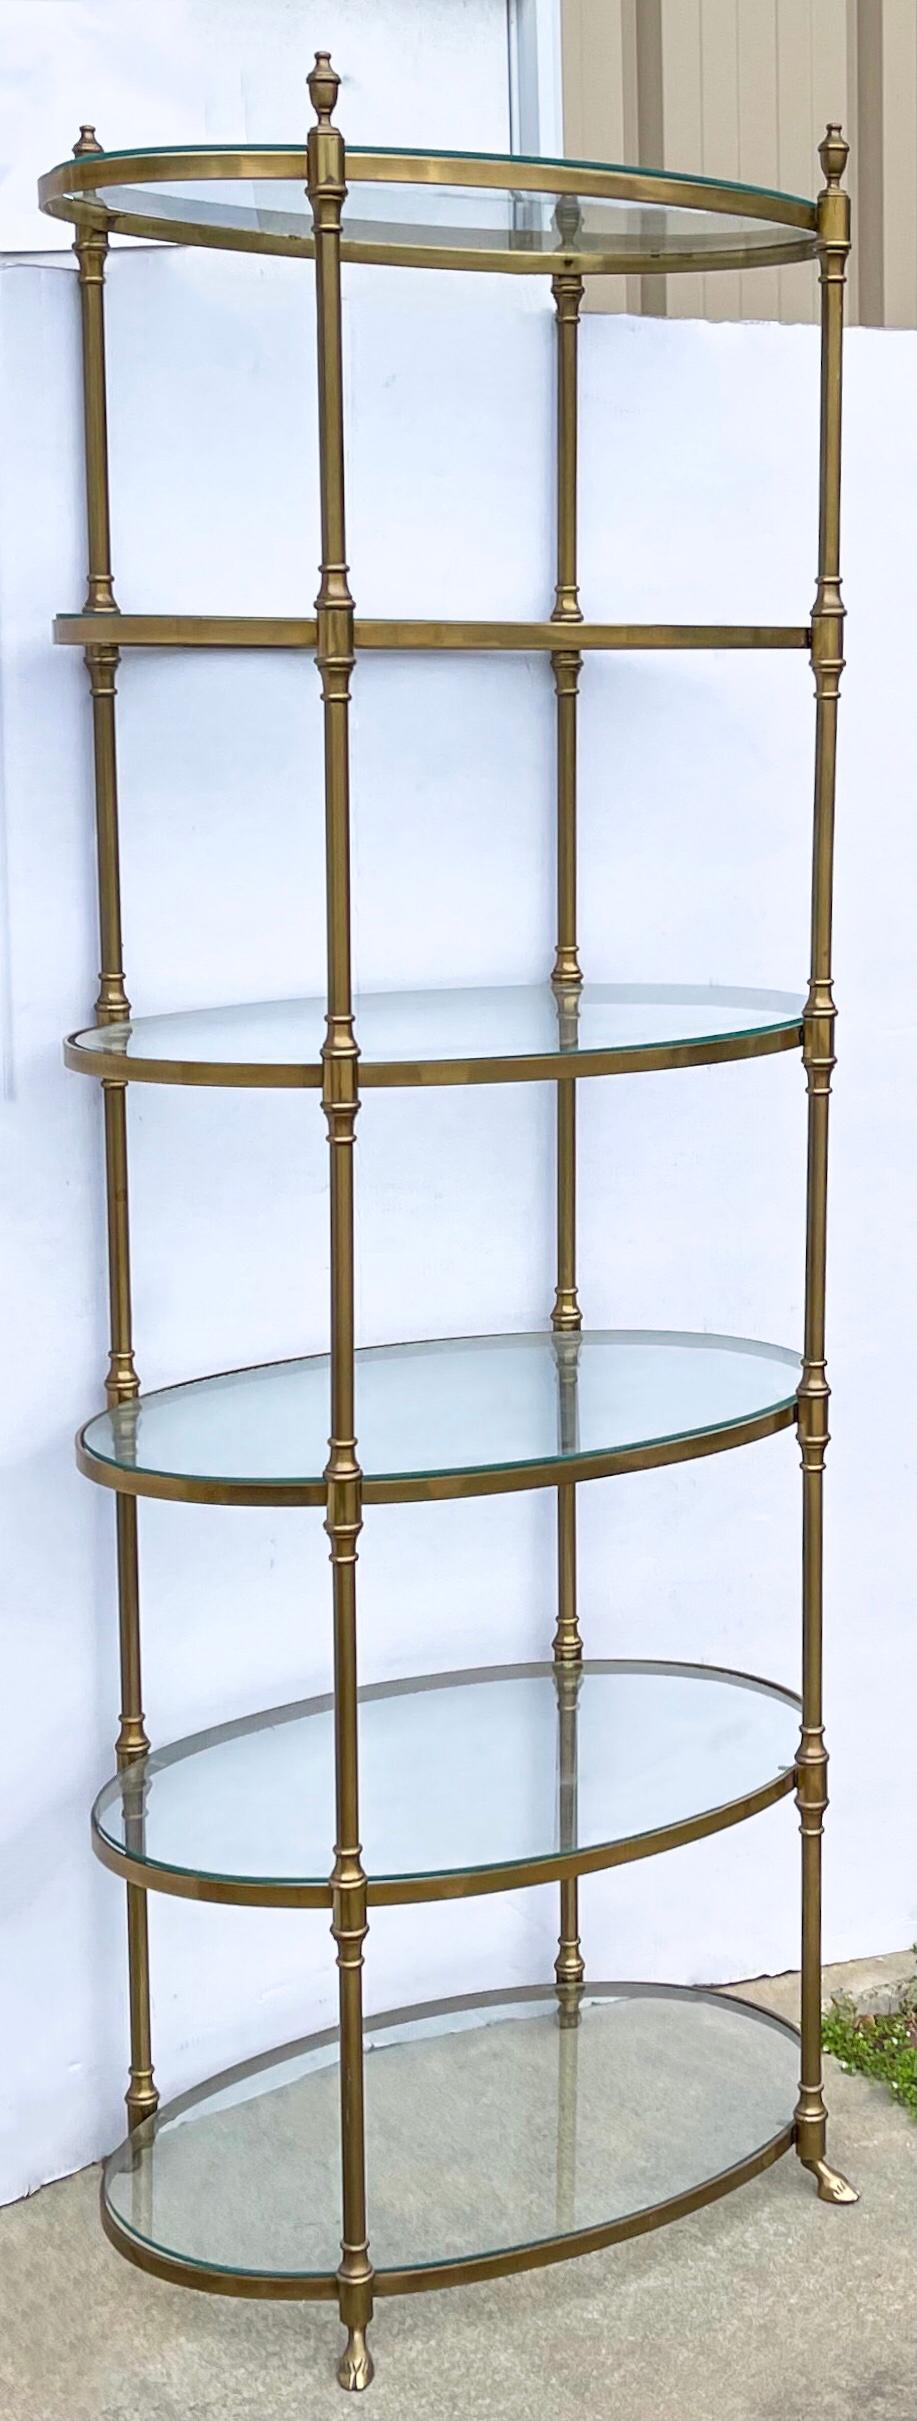 Late 20th Century 1970s Tall Neo-Classical Maison Jensen Style Brass and Glass Etagere / Shelf